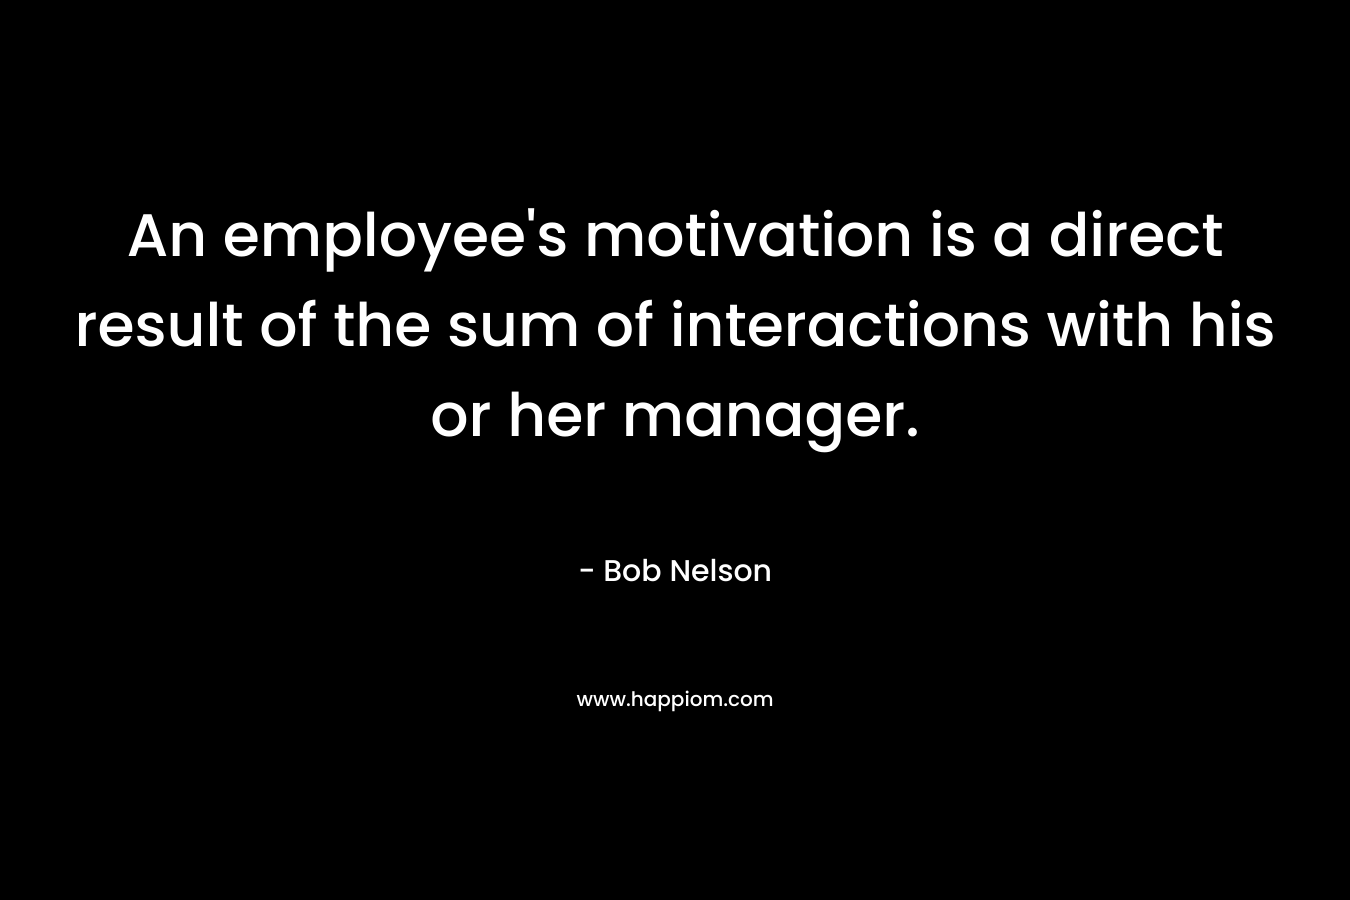 An employee's motivation is a direct result of the sum of interactions with his or her manager.